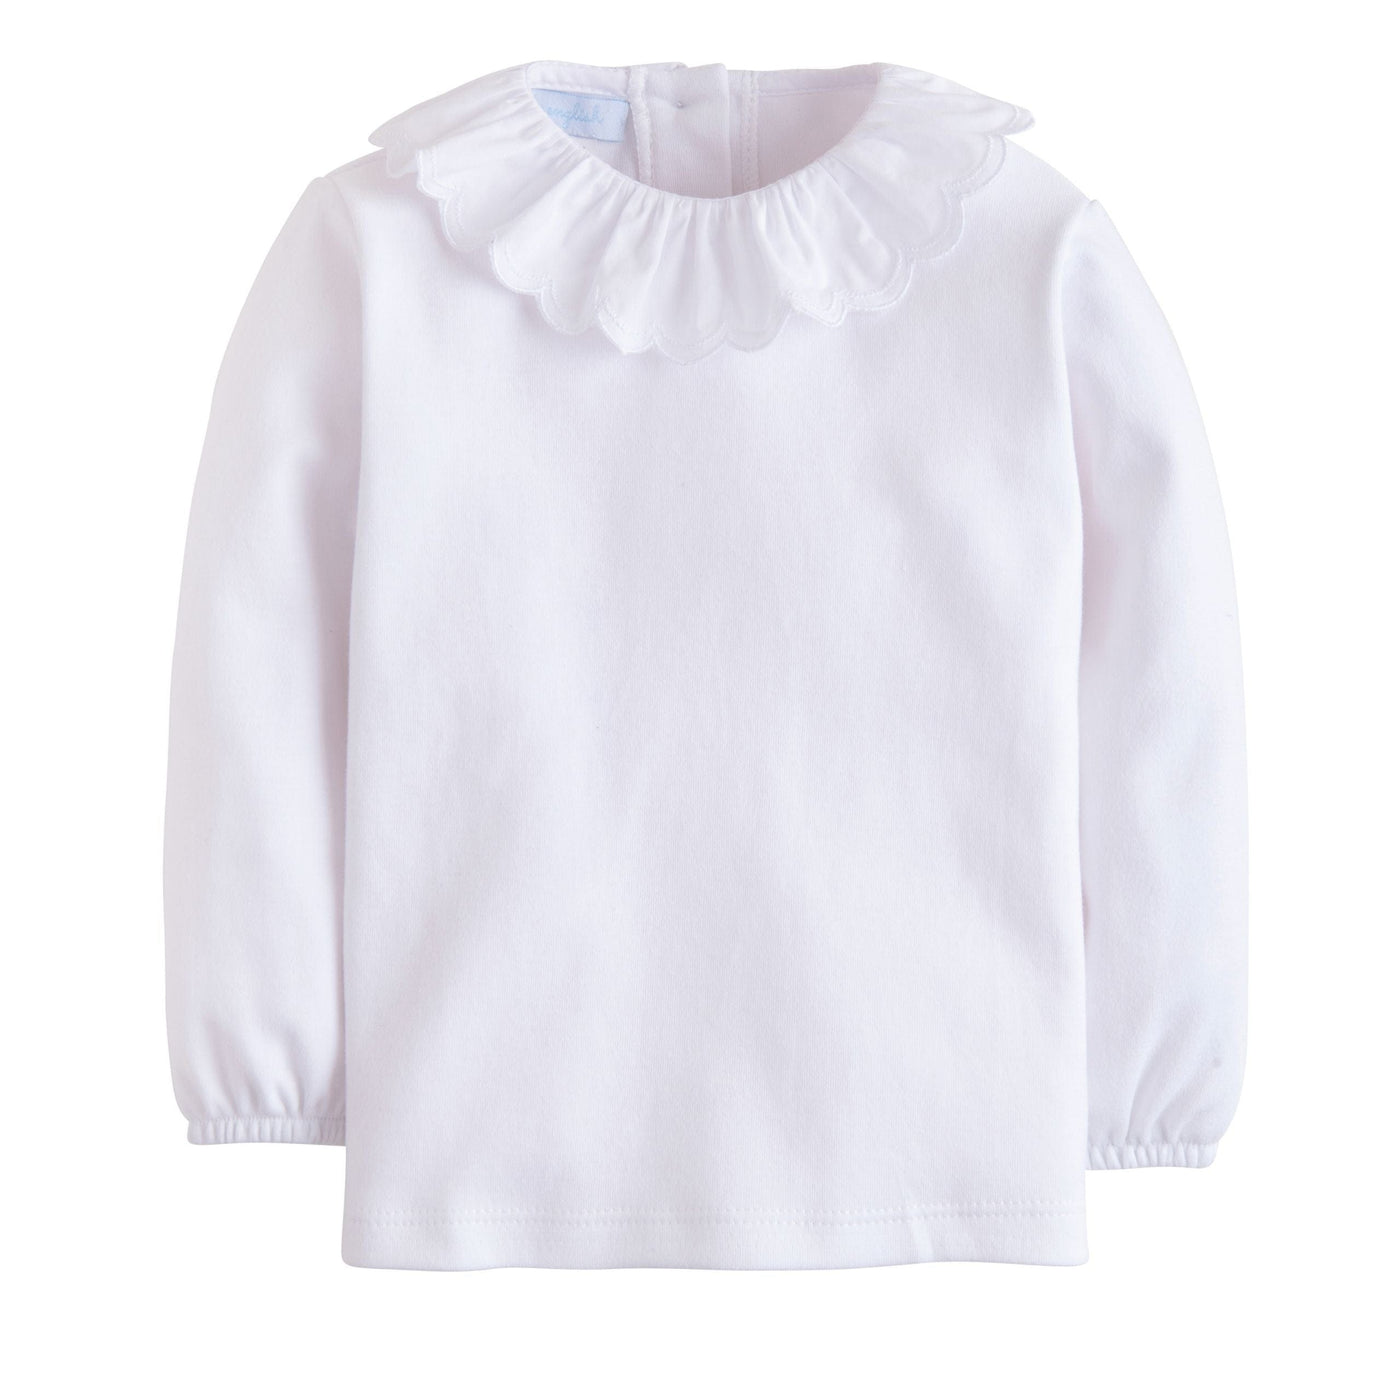 seguridadindustrialcr classic childrens clothing girls white long sleeve blouse with white scalloped collar